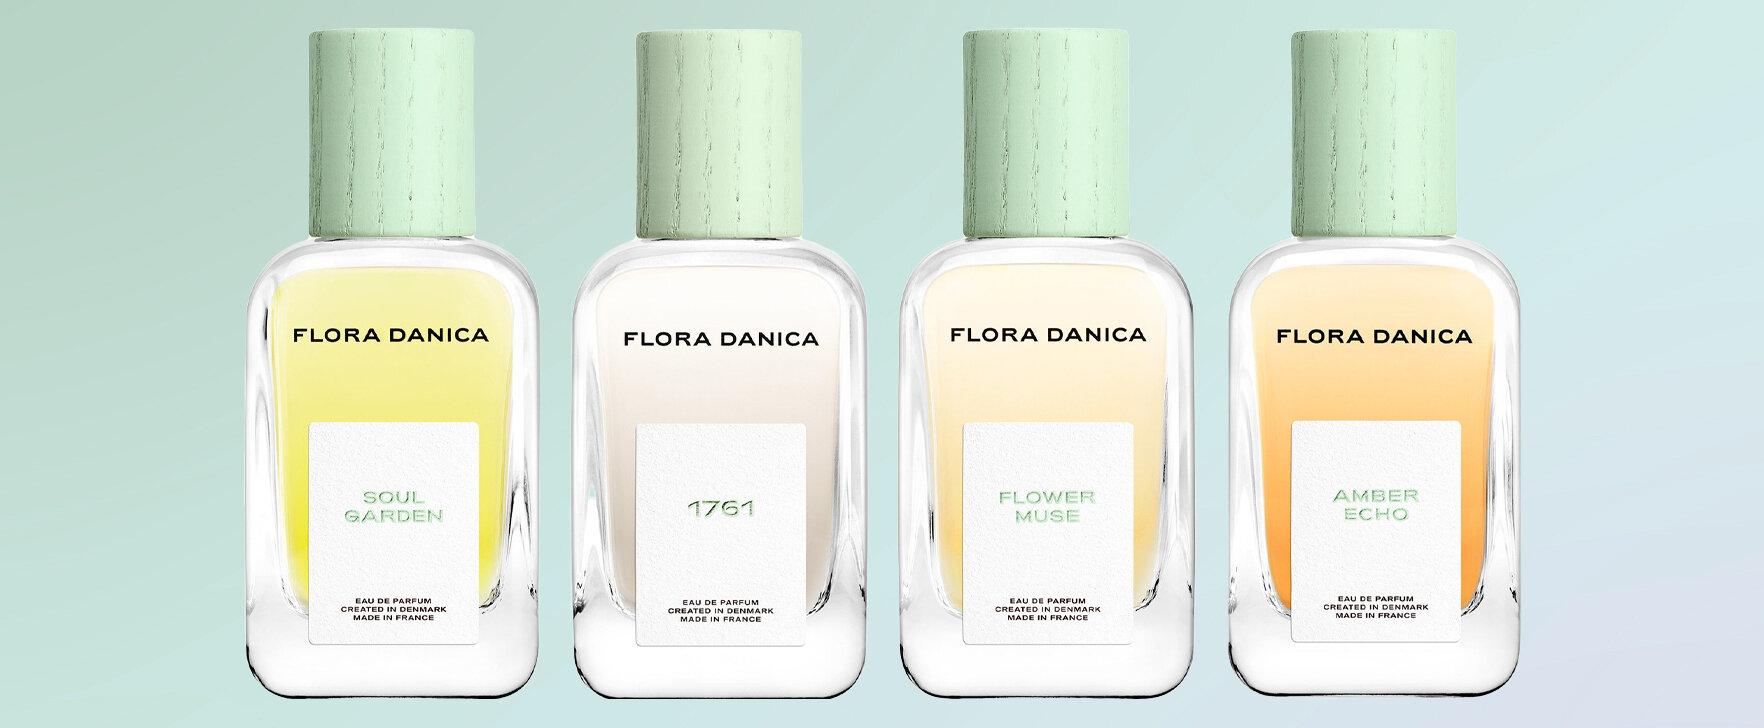 Botanical Fragrance Worlds: Flora Danica's First Perfume Collection